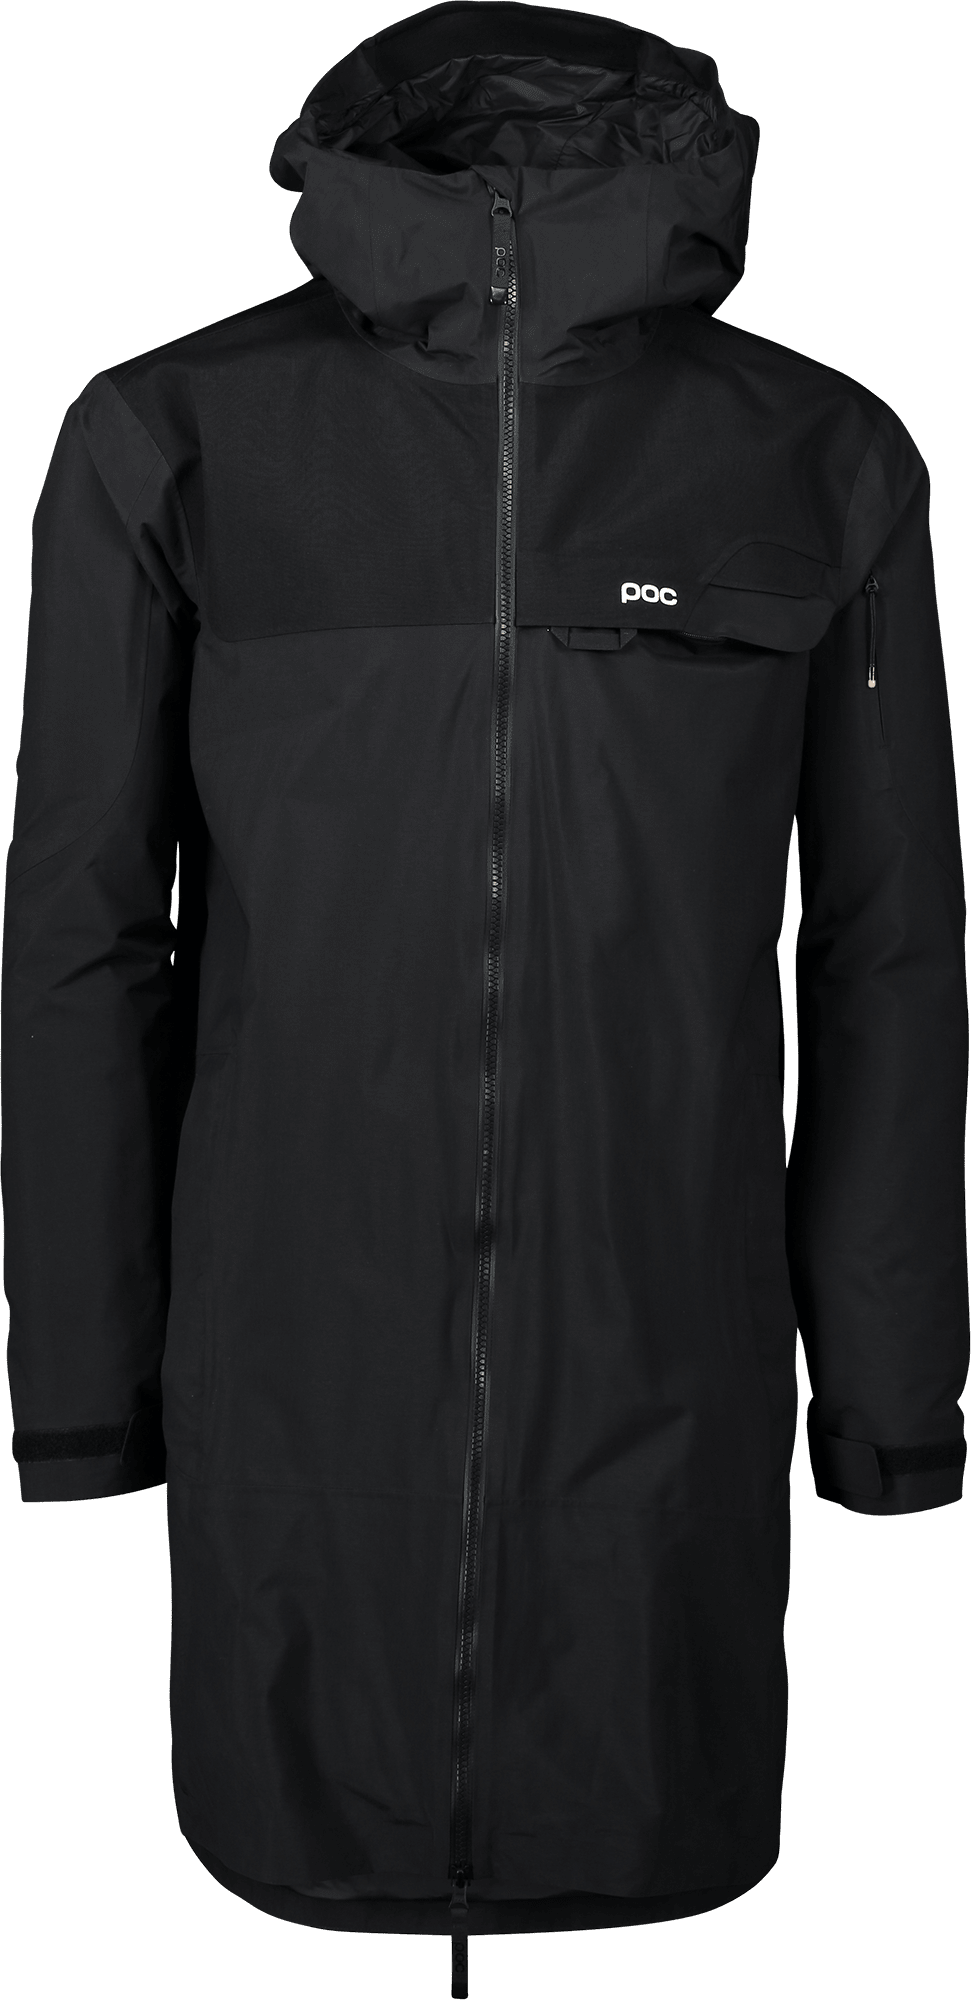 Buy POC Men's Mentor Coat from Outnorth